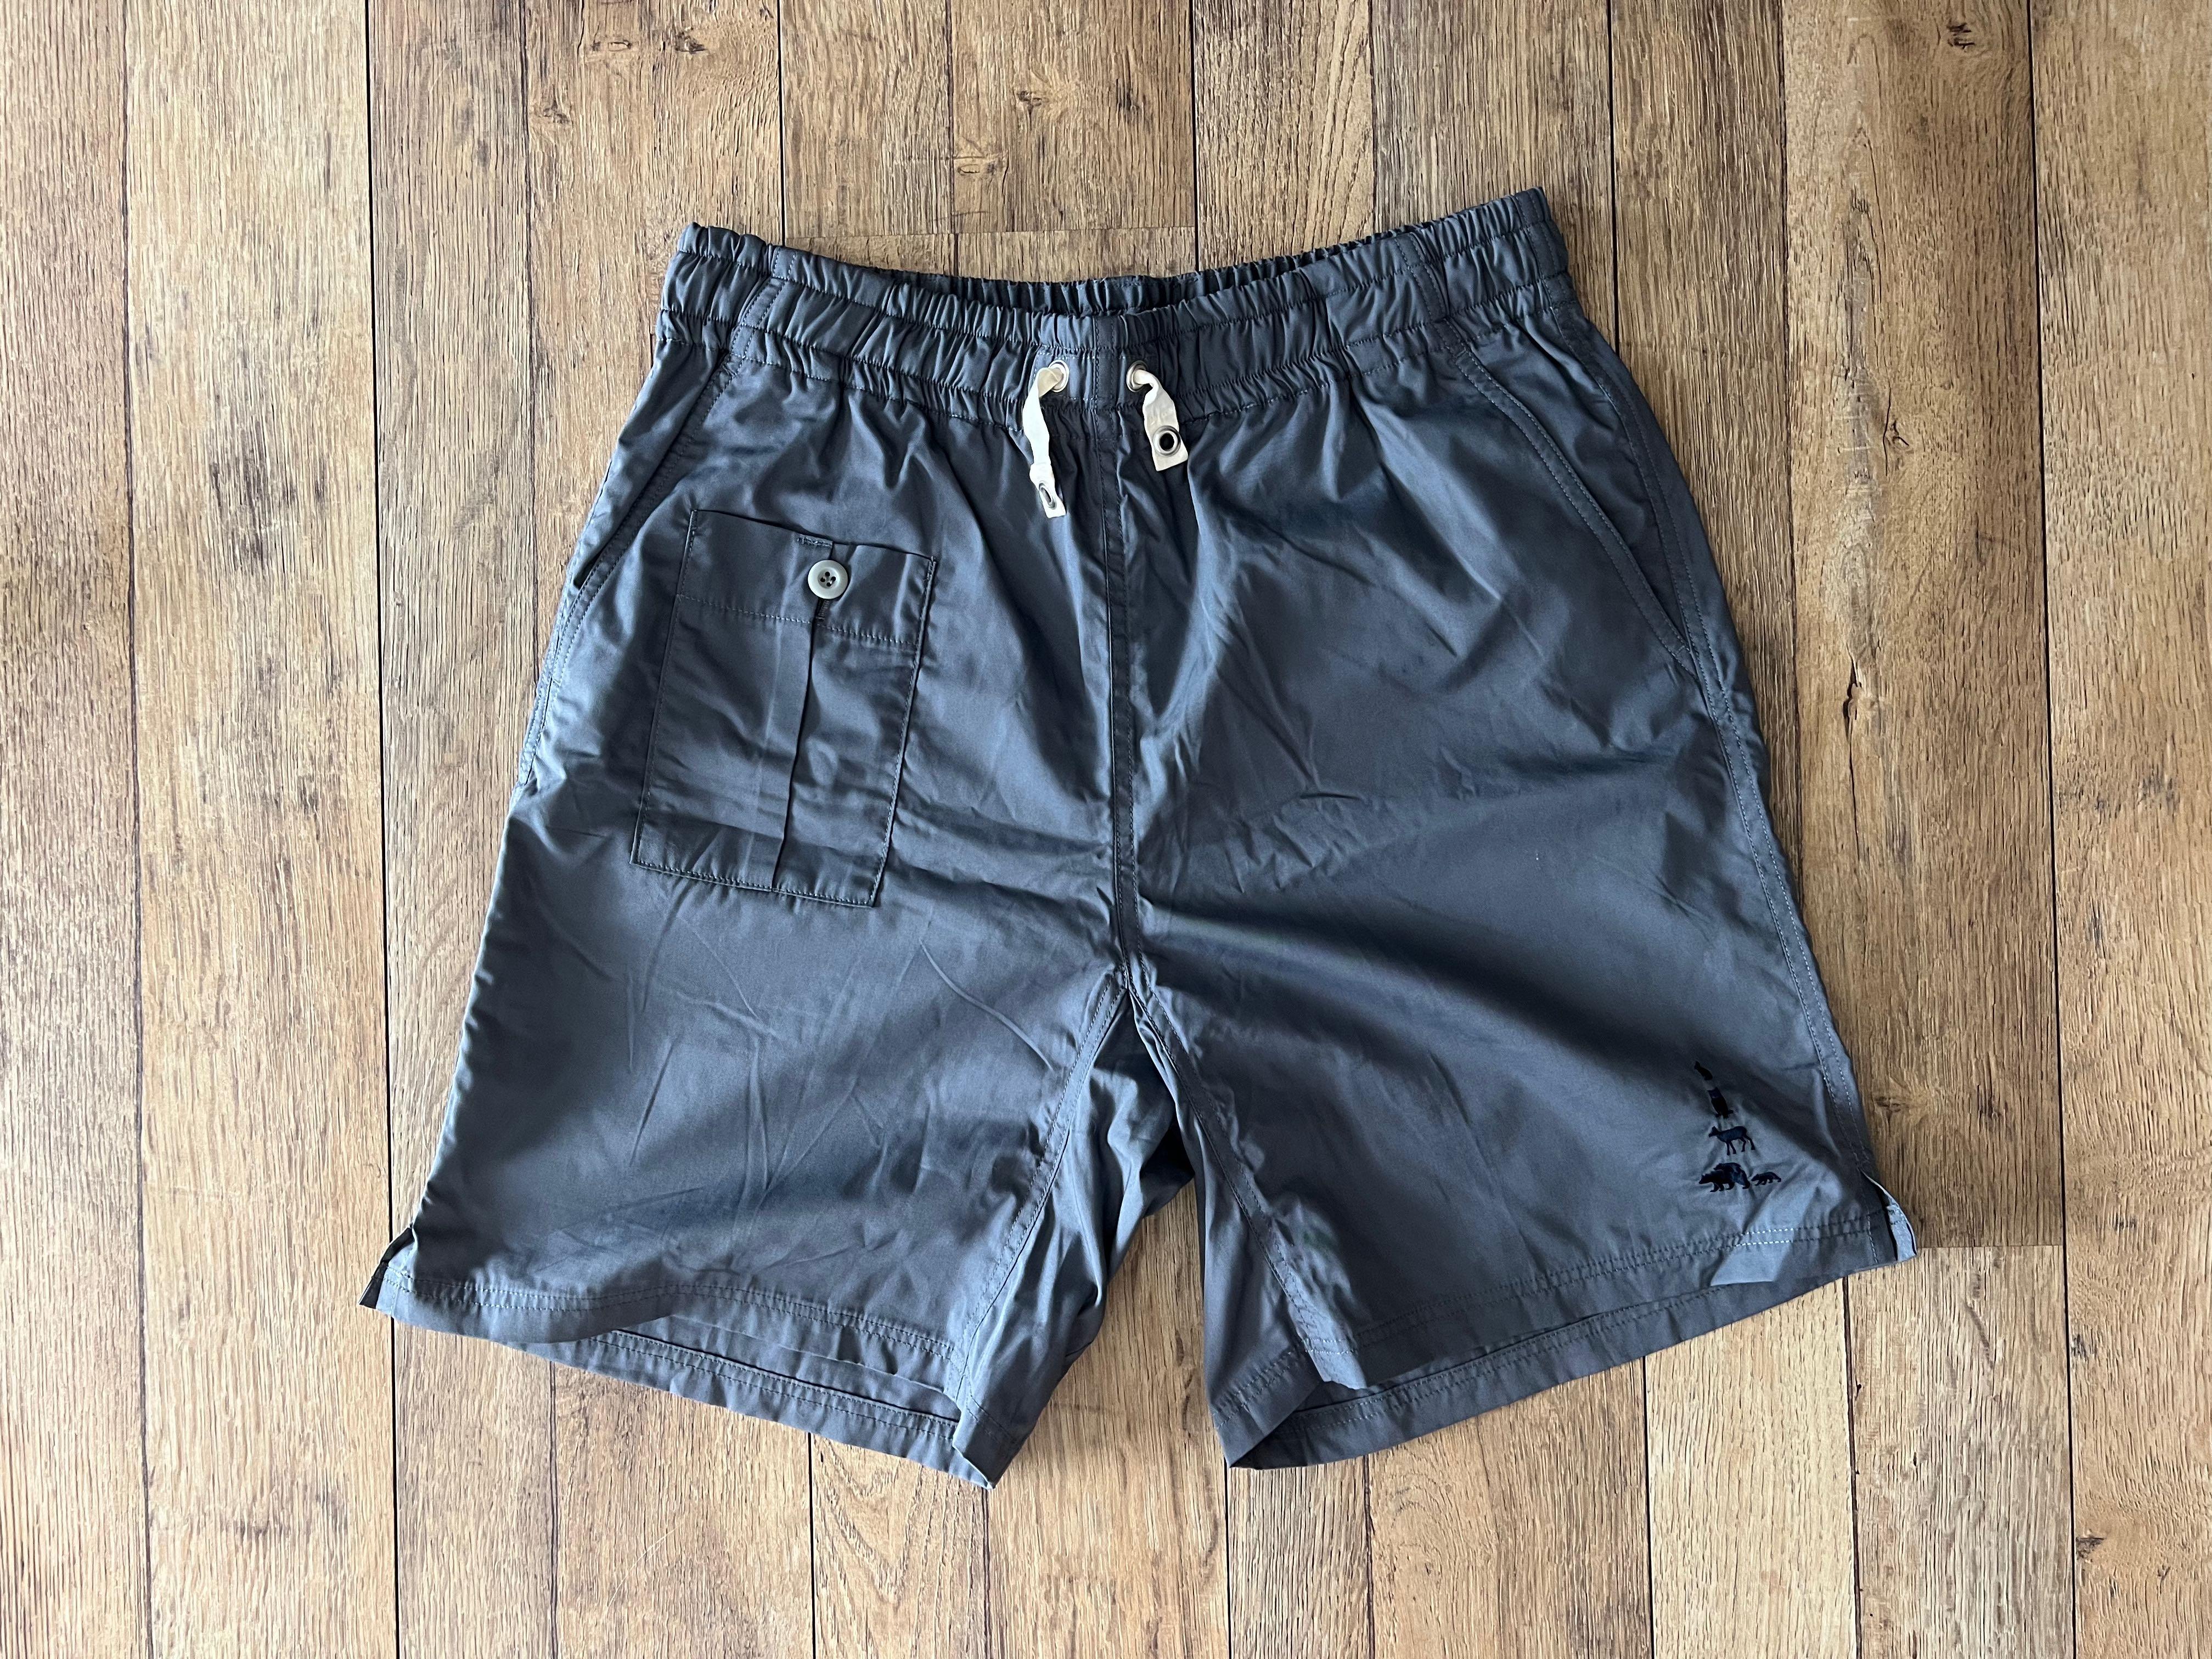 MOUNTAIN RESEARCH SURF SHORTS , Men's Fashion, Bottoms, Shorts on